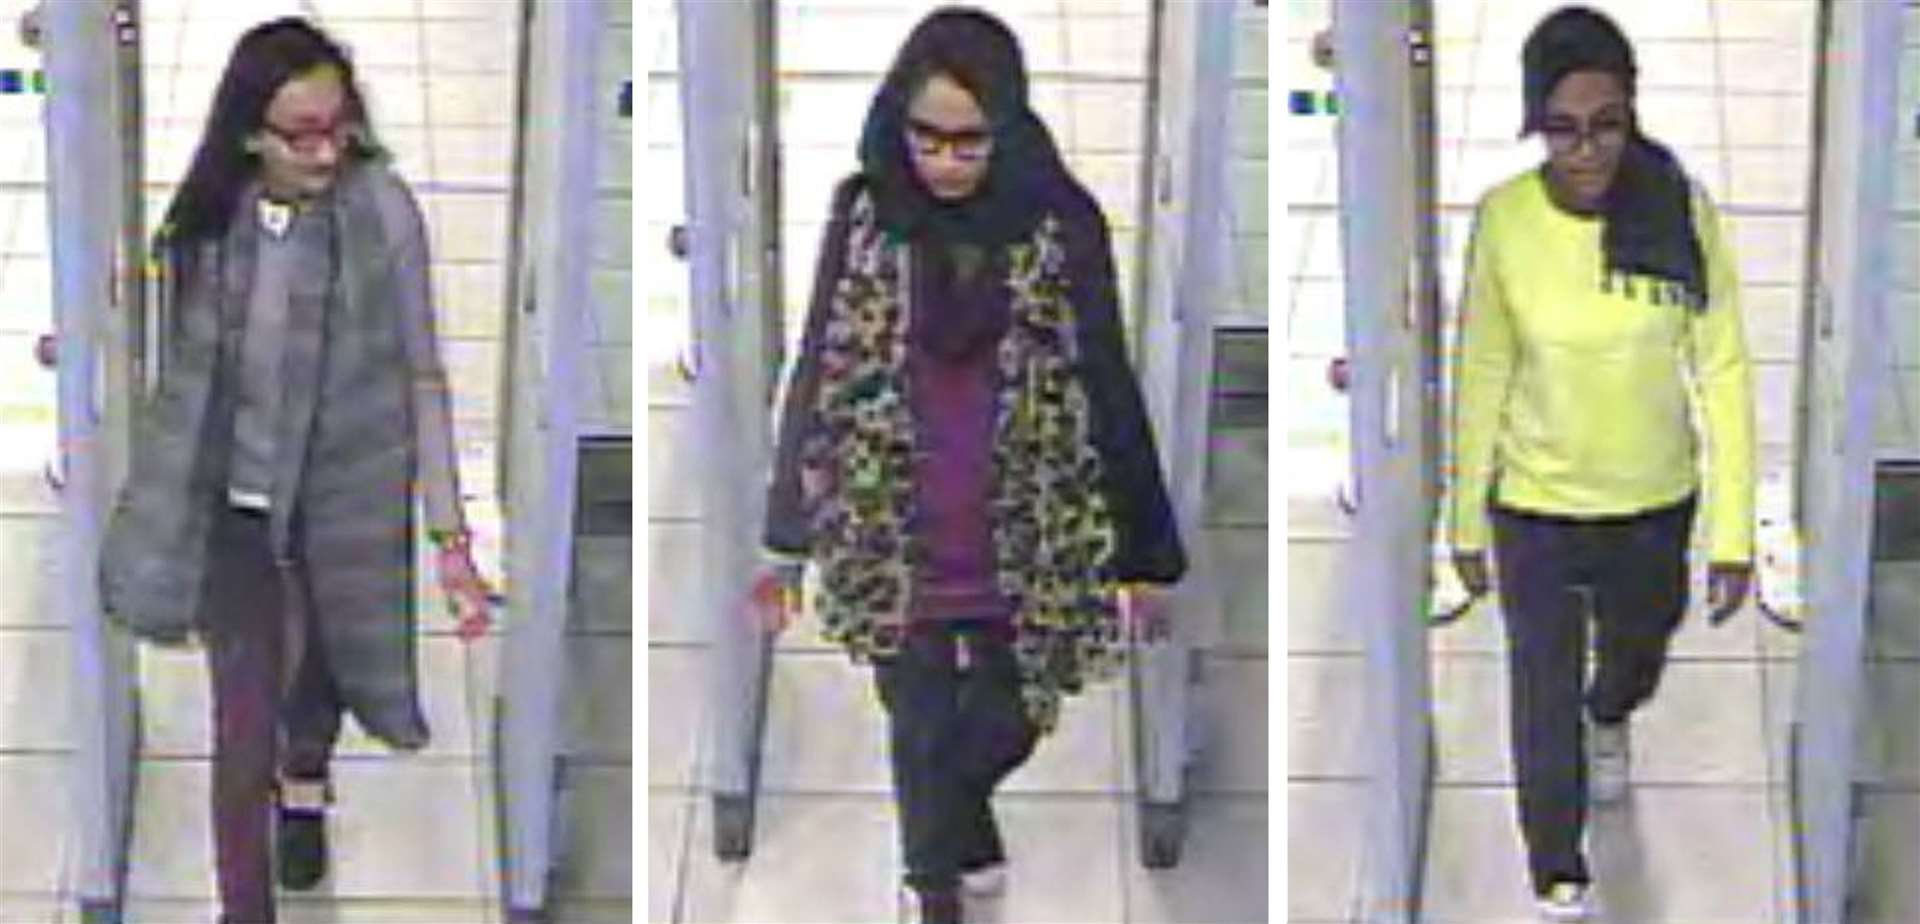 (L to R) Kadiza Sultana, Shamima Begum and Amira Abase caught on CCTV going through security at Gatwick Airport in 2015, before catching flight to Turkey (Metropolitan Police/PA)